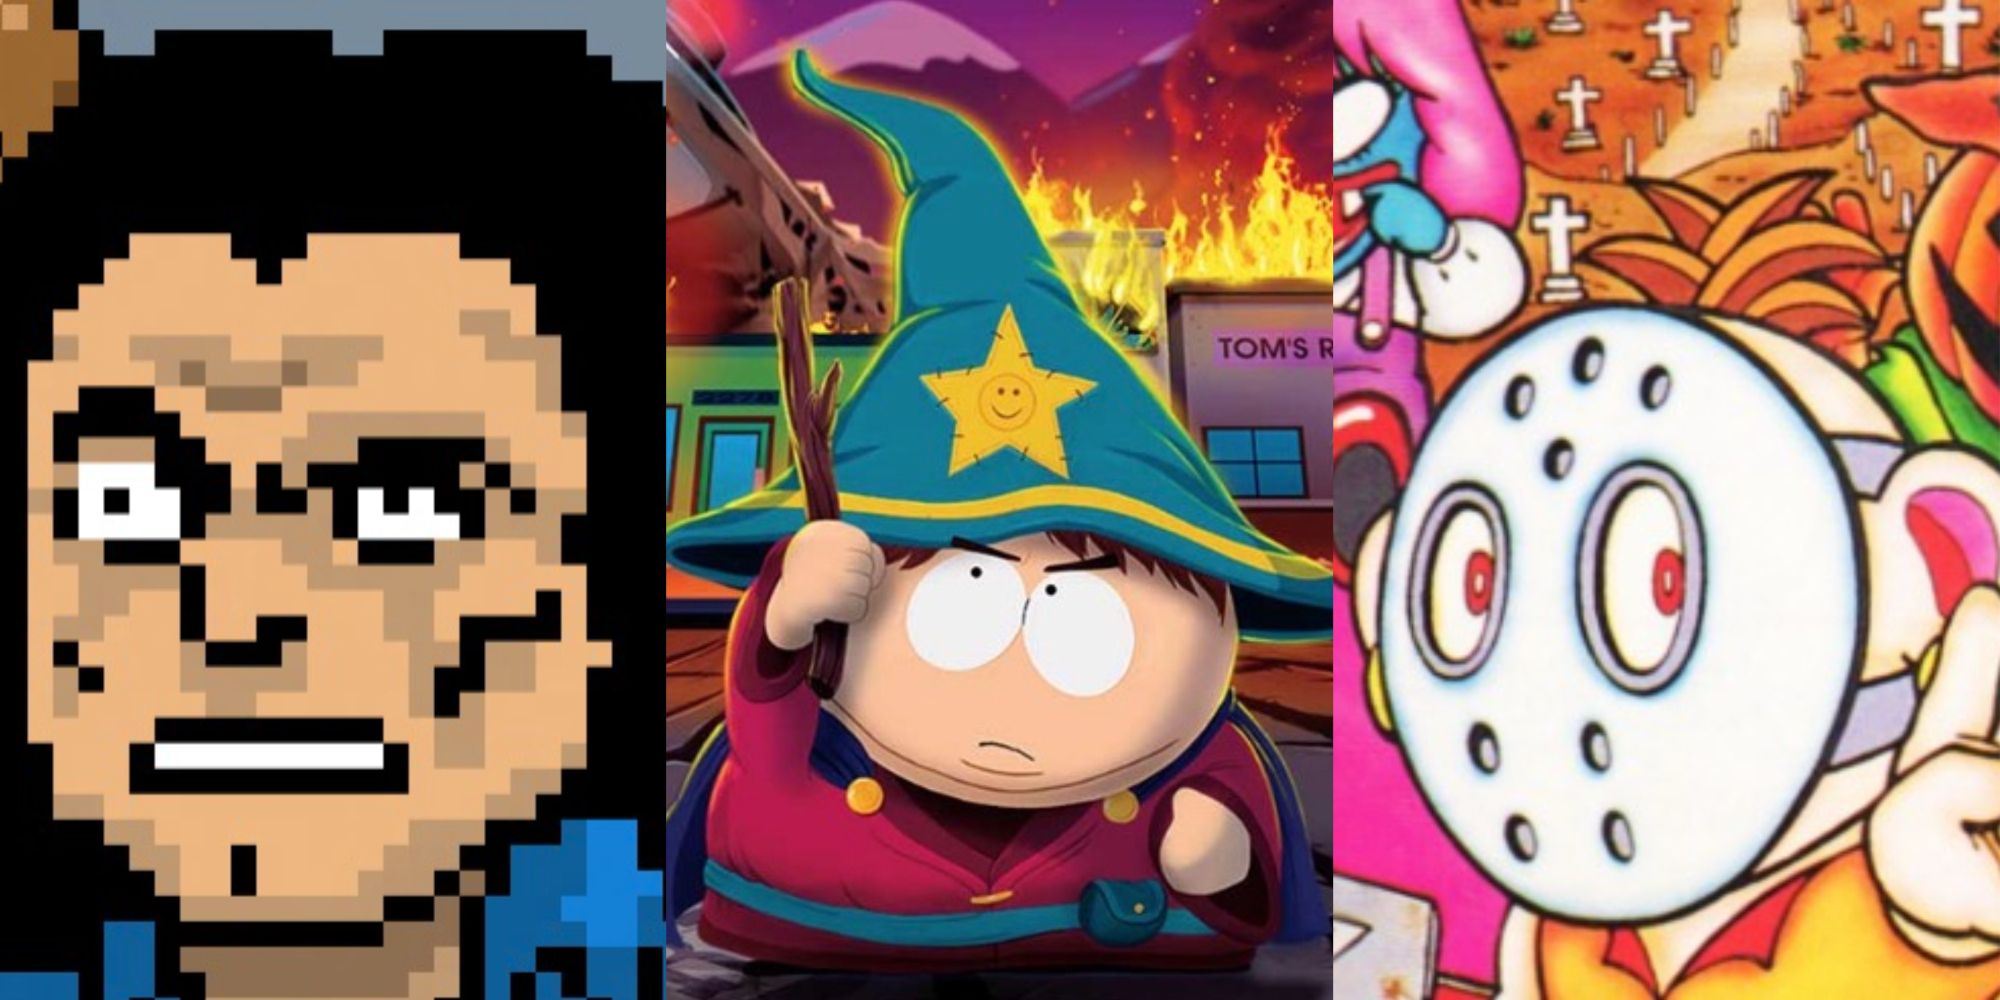 Johnny from The Room Tribute, Cartman from South Park: The Stick Of Truth, Cover for Splatterhouse: Wanpaku Graffiti